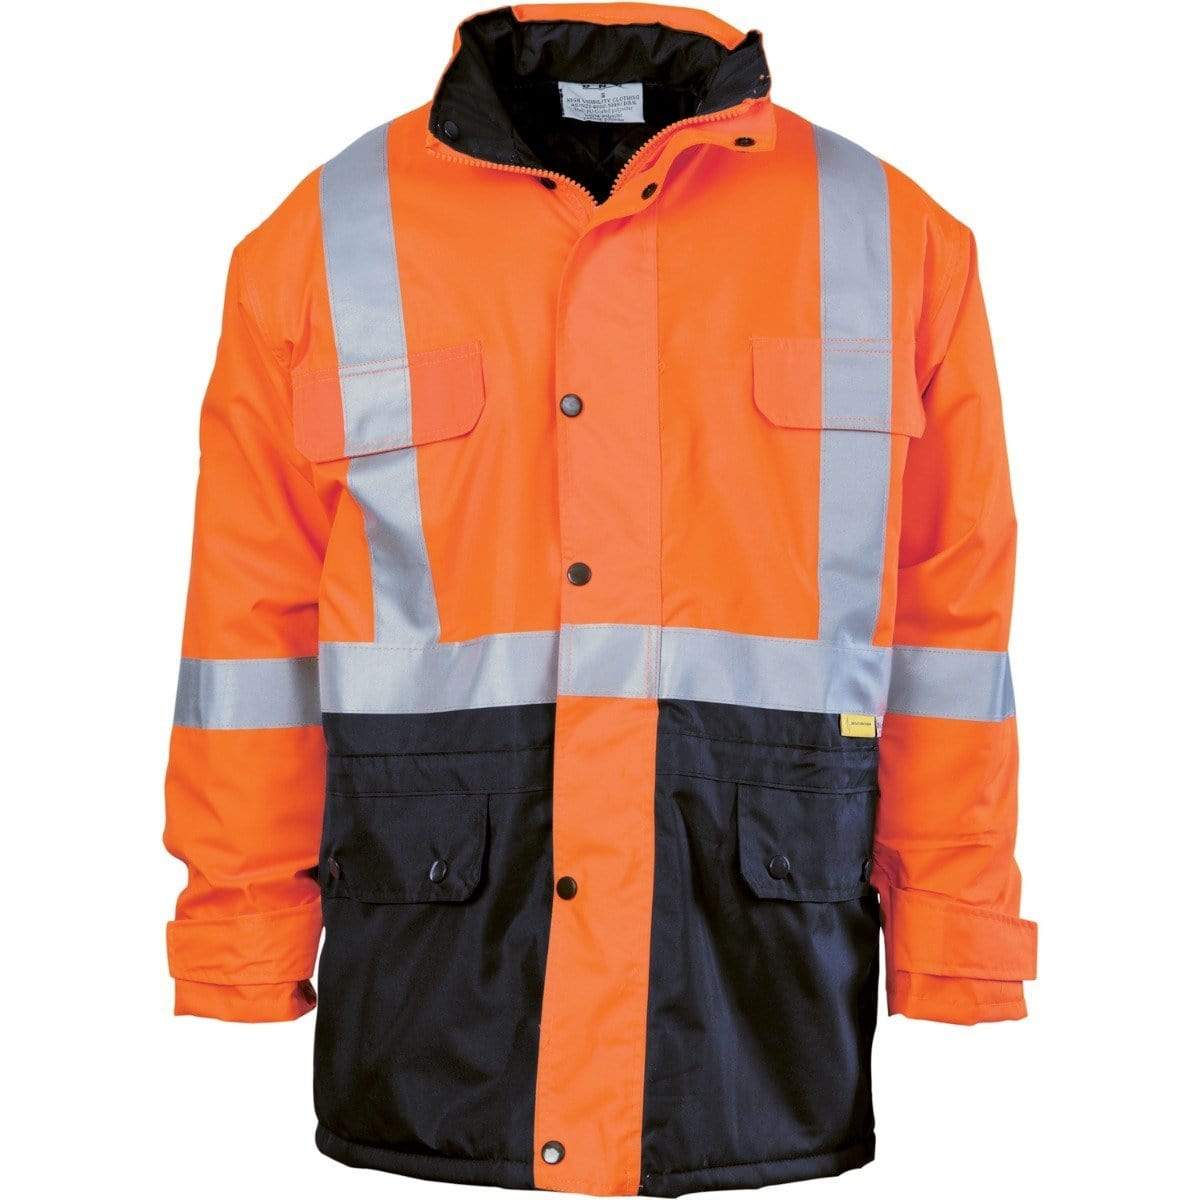 Dnc Workwear Hi-vis Two-tone Quilted Jacket With 3m Reflective Tape - 3863 Work Wear DNC Workwear Orange/Navy S 